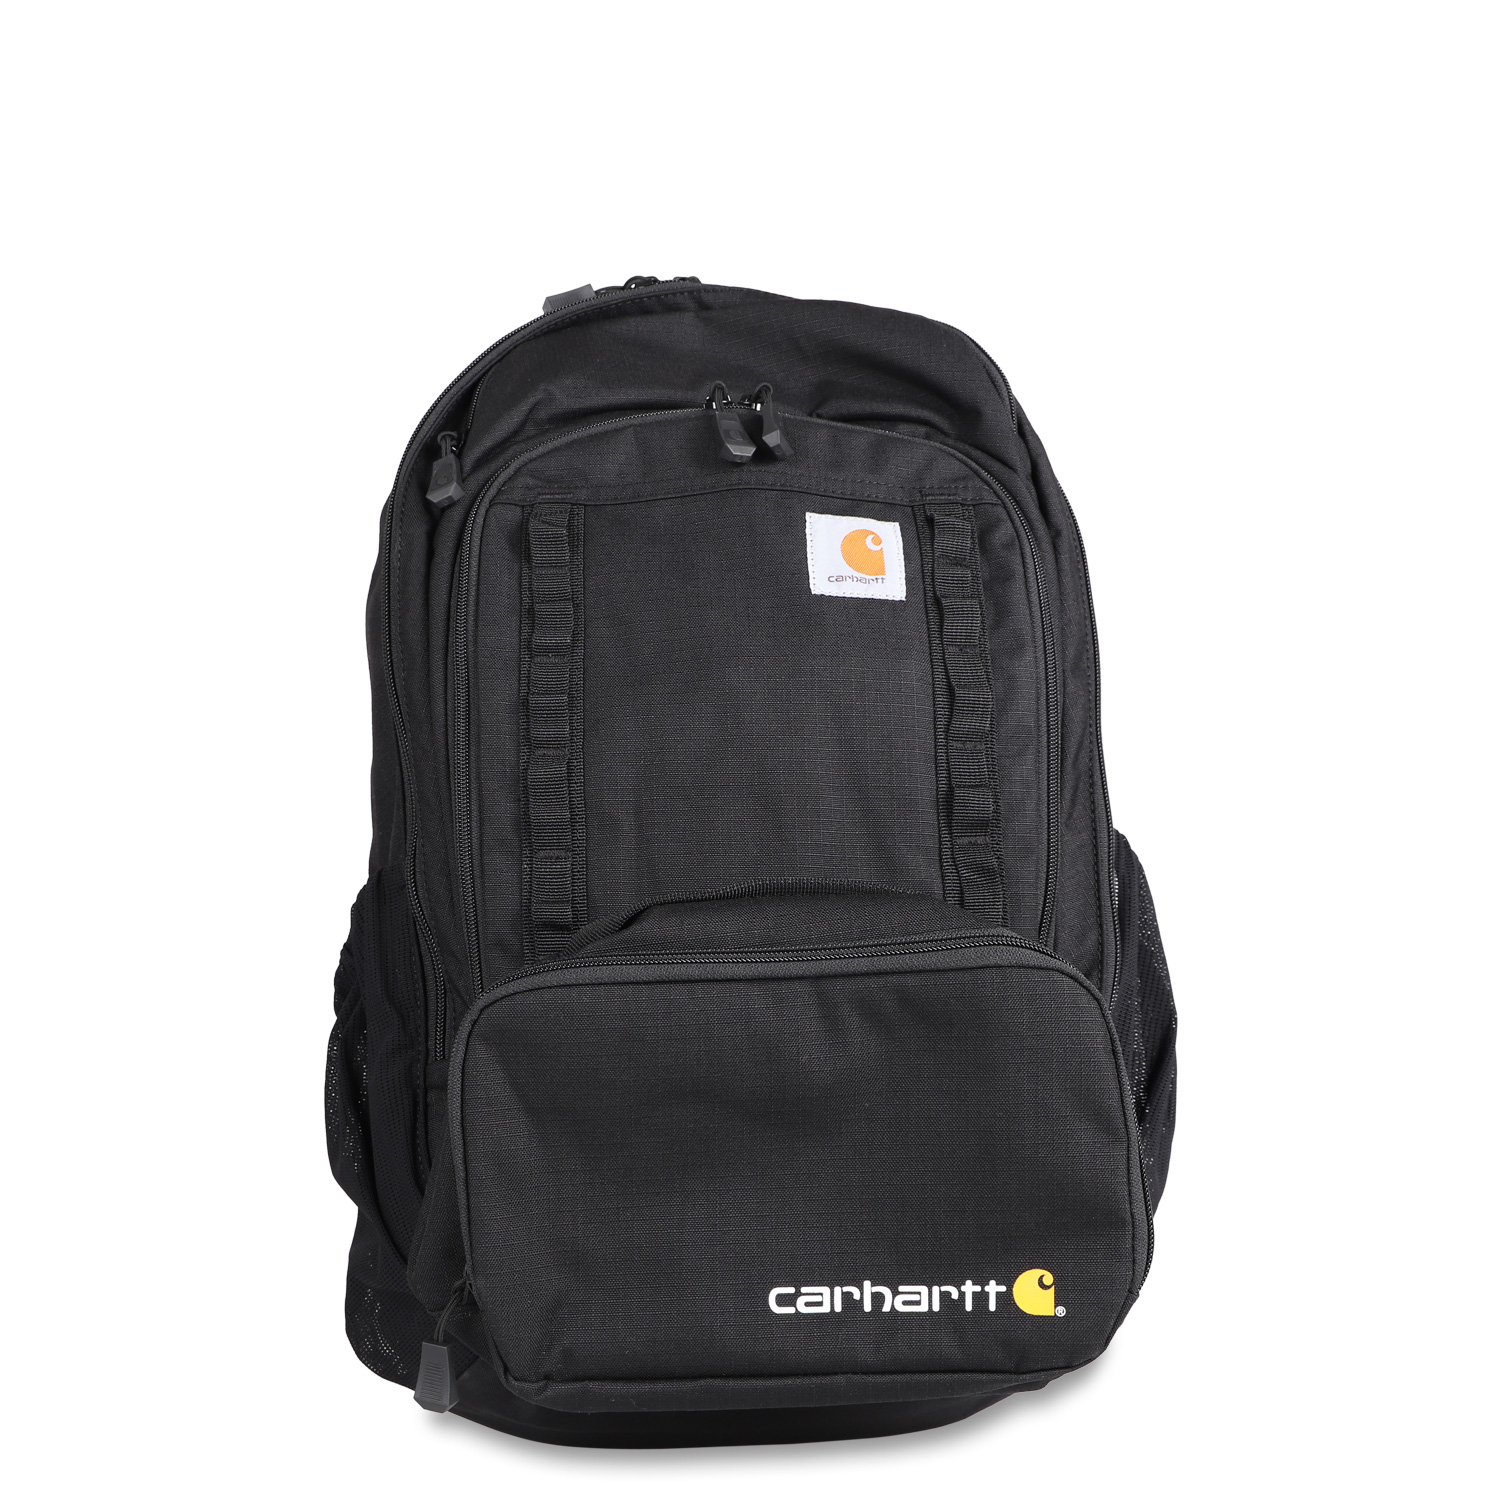 carhartt カーハート リュック バッグ メンズ レディース 大容量 25L CARGO SERIES BACKPACK 3 CAN COOLER COMBO 89520313｜biget｜02